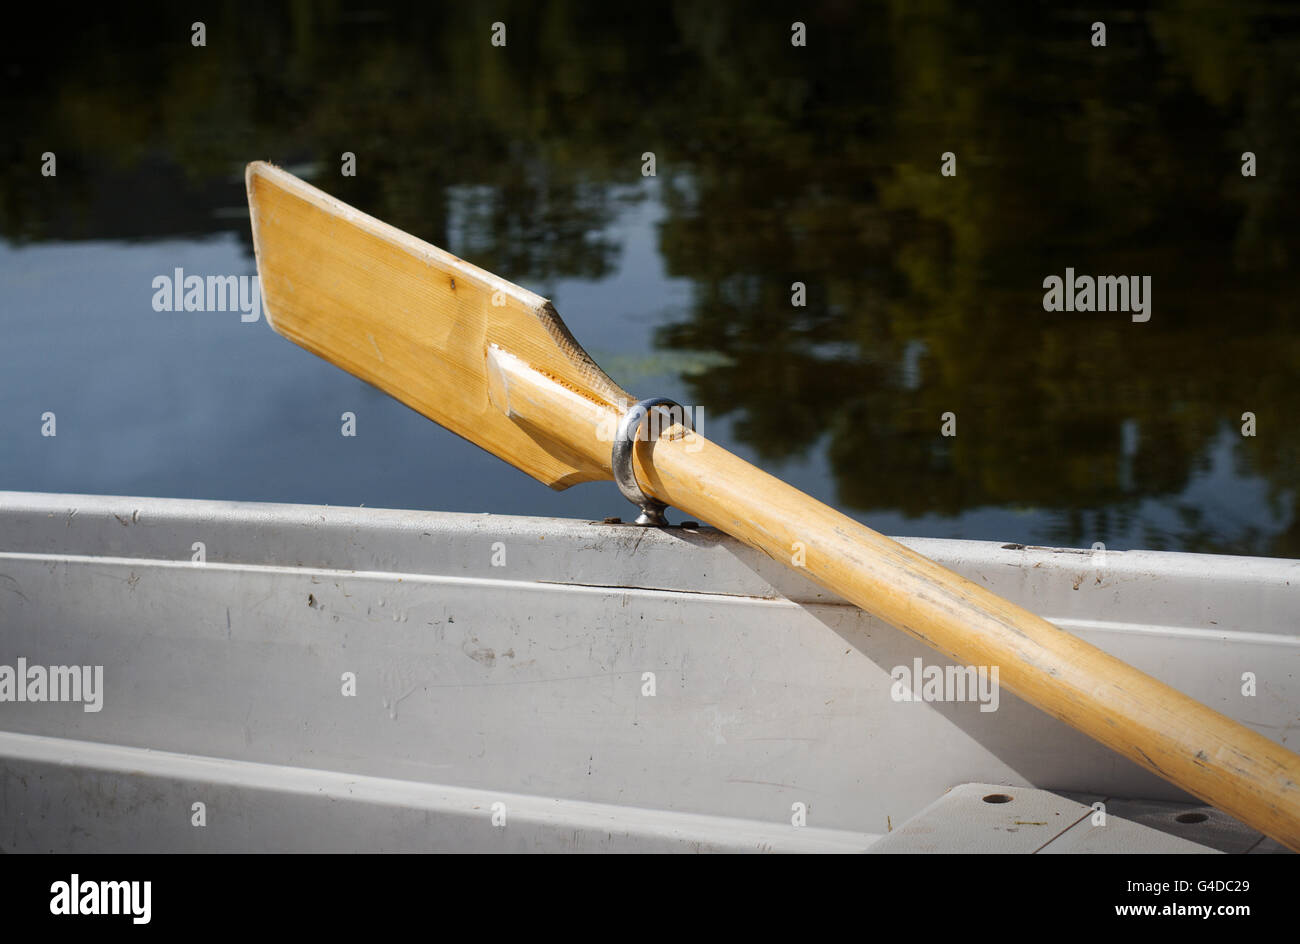 horizontal perspective view of a recreational boat on a lake with oars up Stock Photo